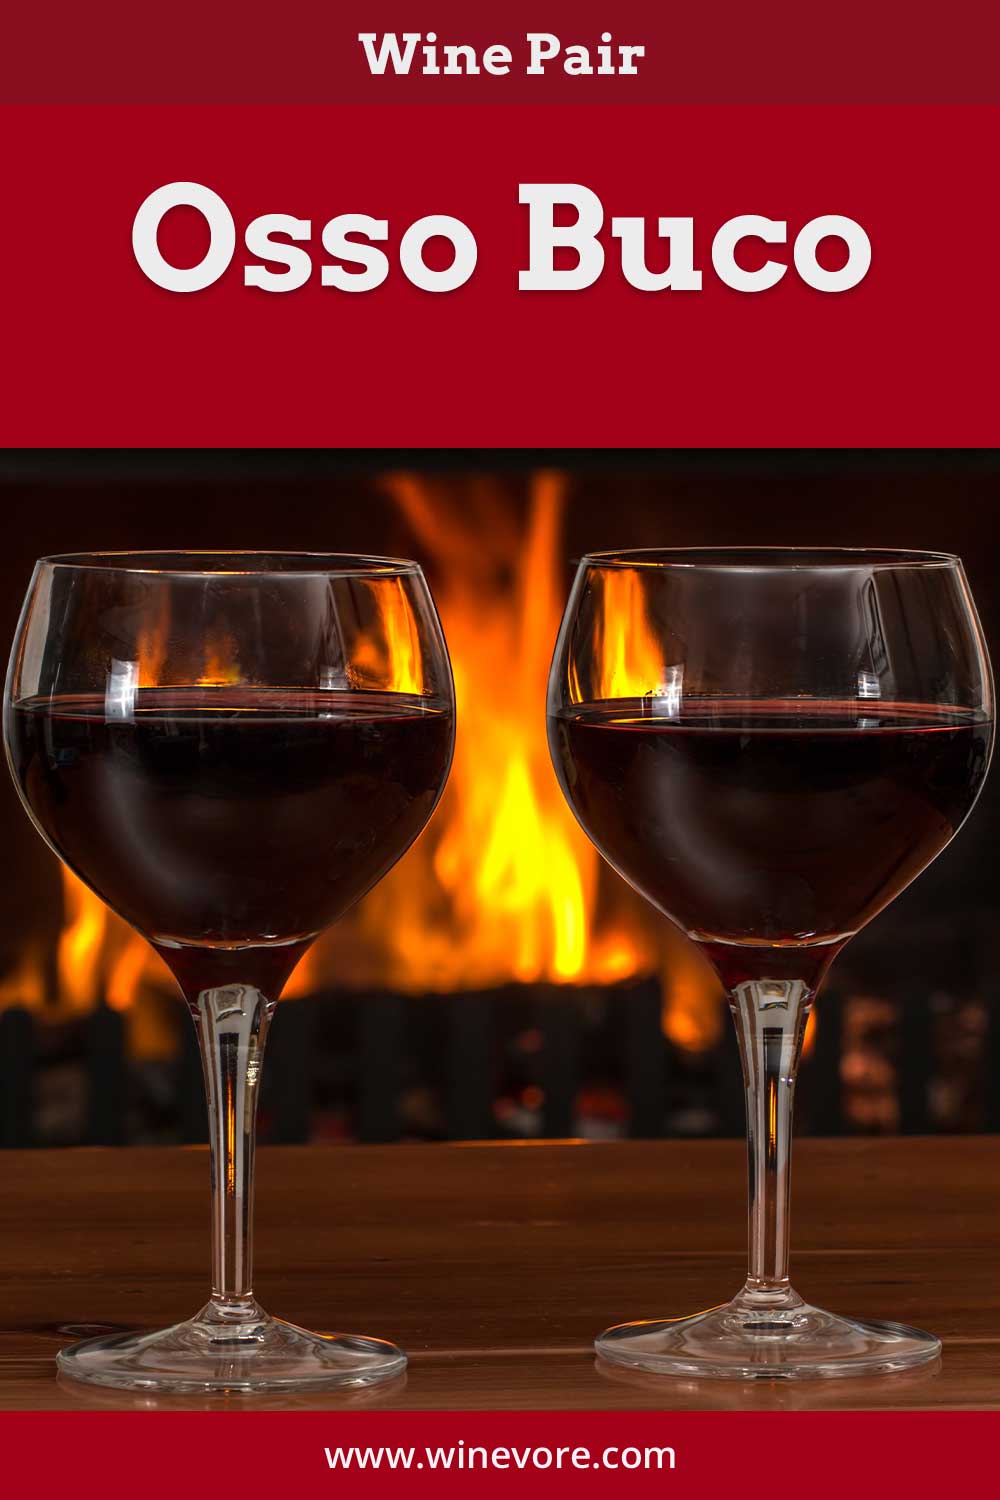 Two wine glasses in front of a fireplace - Wine Pair Osso Buco.